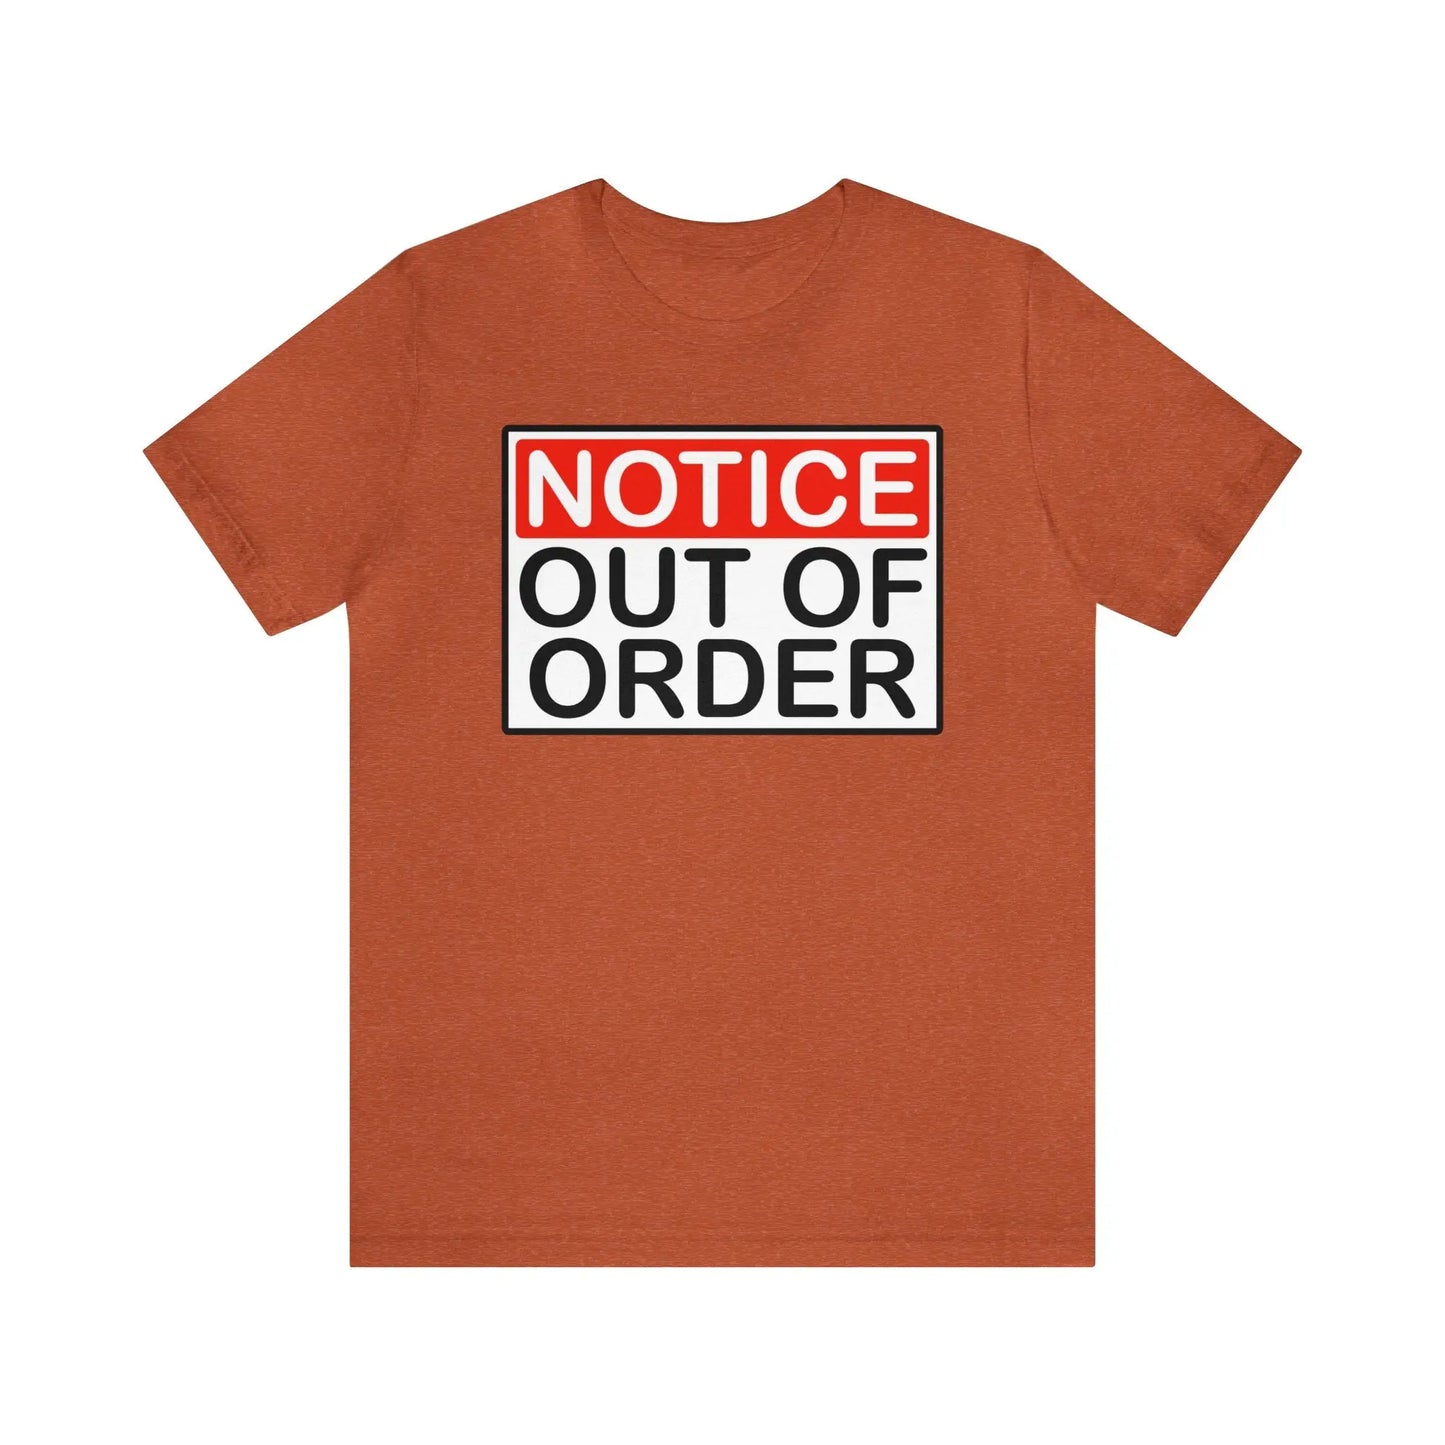 Notice Out Of Order Men's Short Sleeve Tee - Wicked Tees